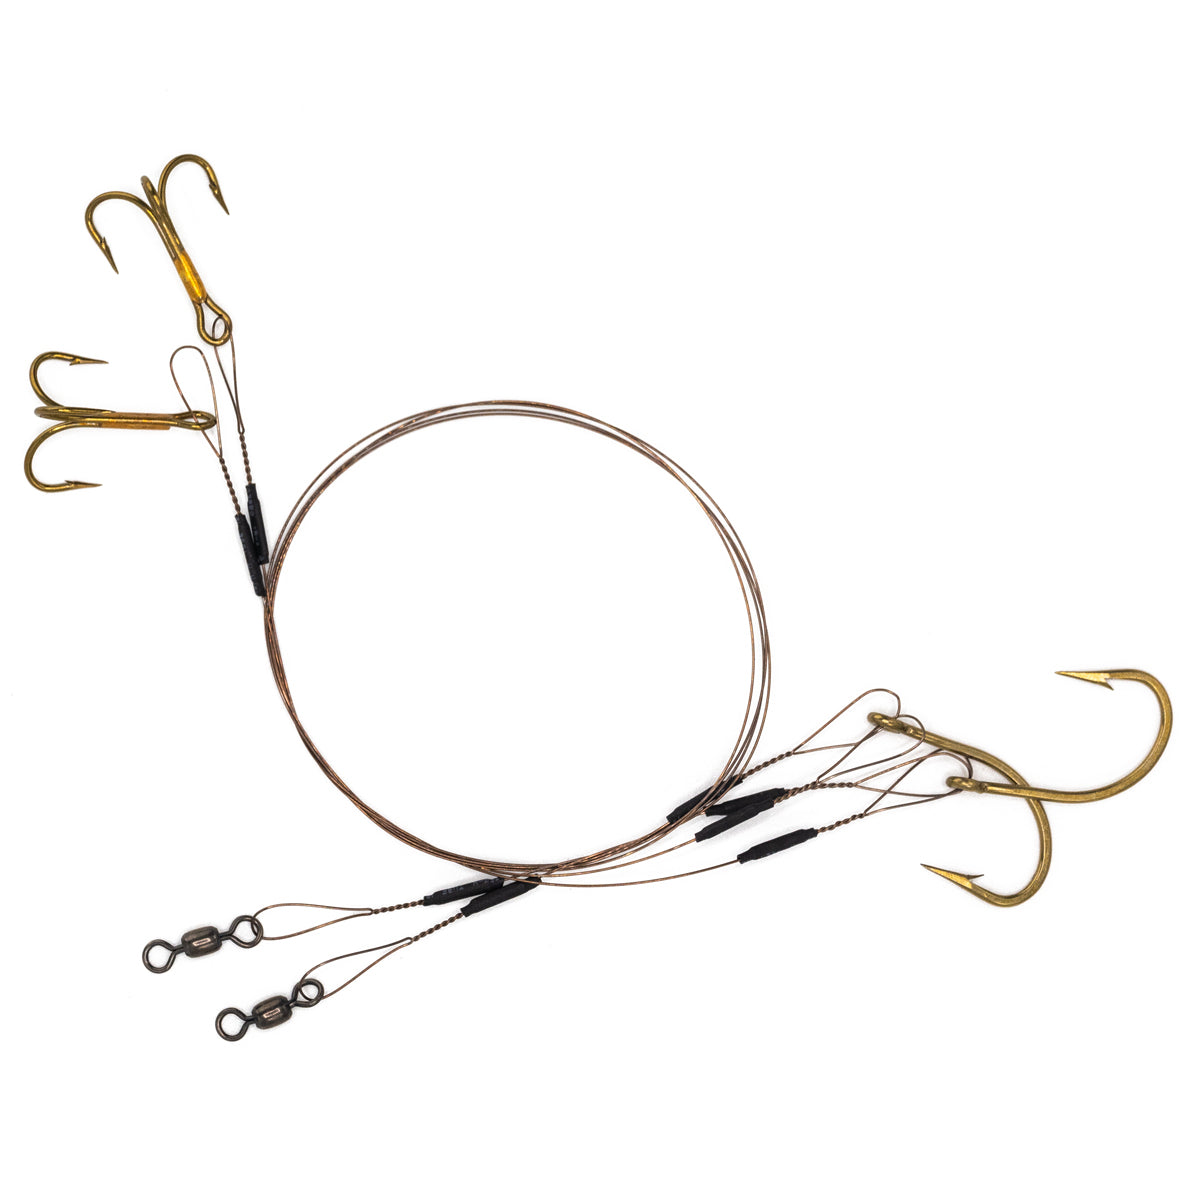 Single Drop Fishing Leaders (4 pk)- Wire Leader with 6/0 Circle